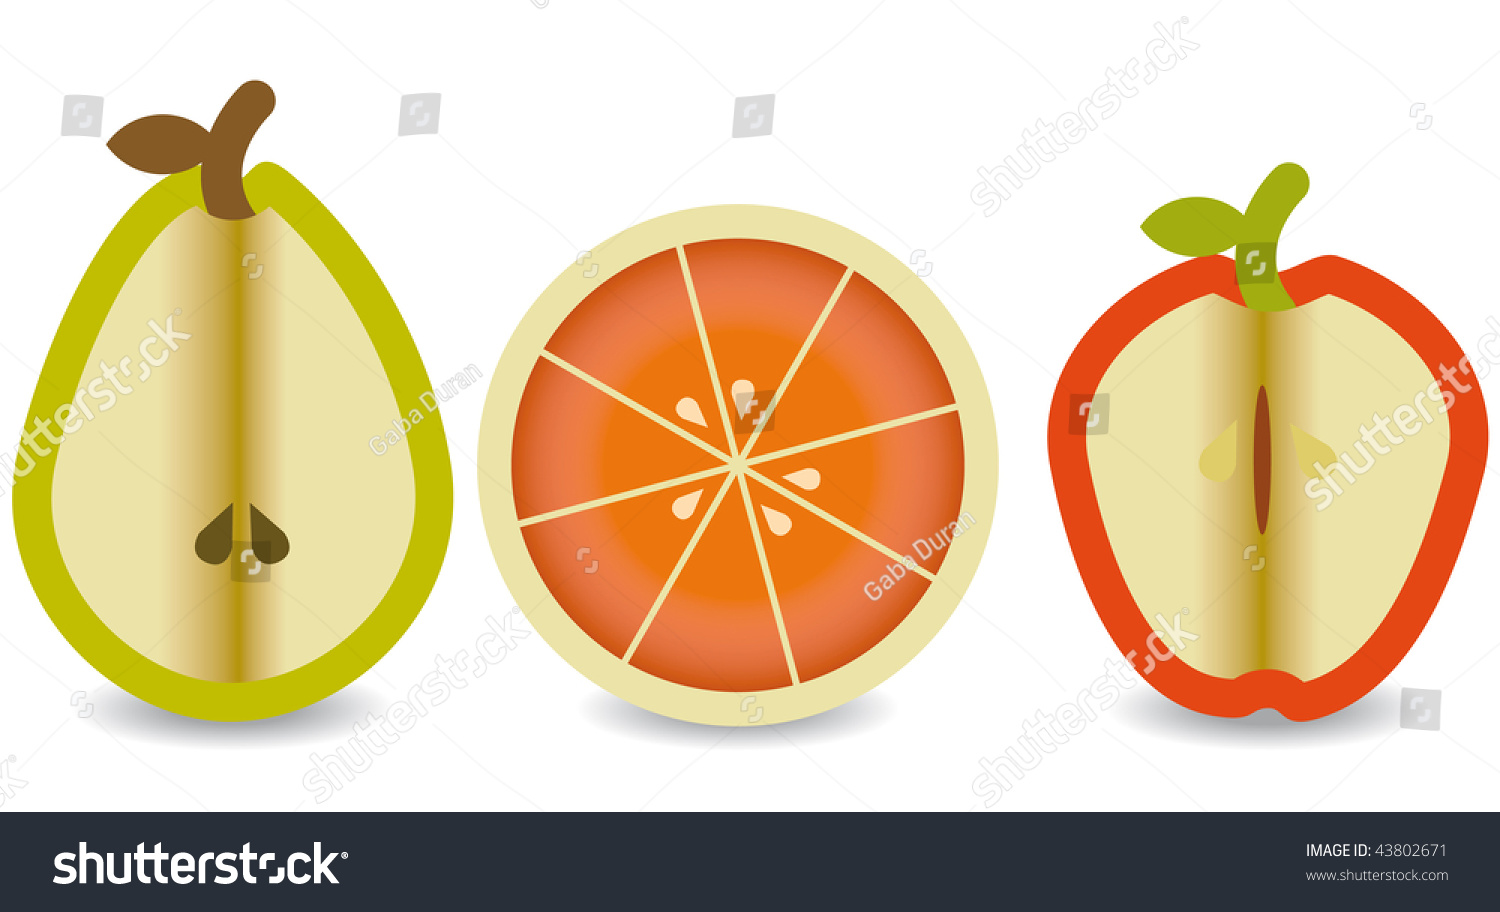 Three Fresh Fruits Cut In The Middle Stock Vector Illustration 43802671 ...